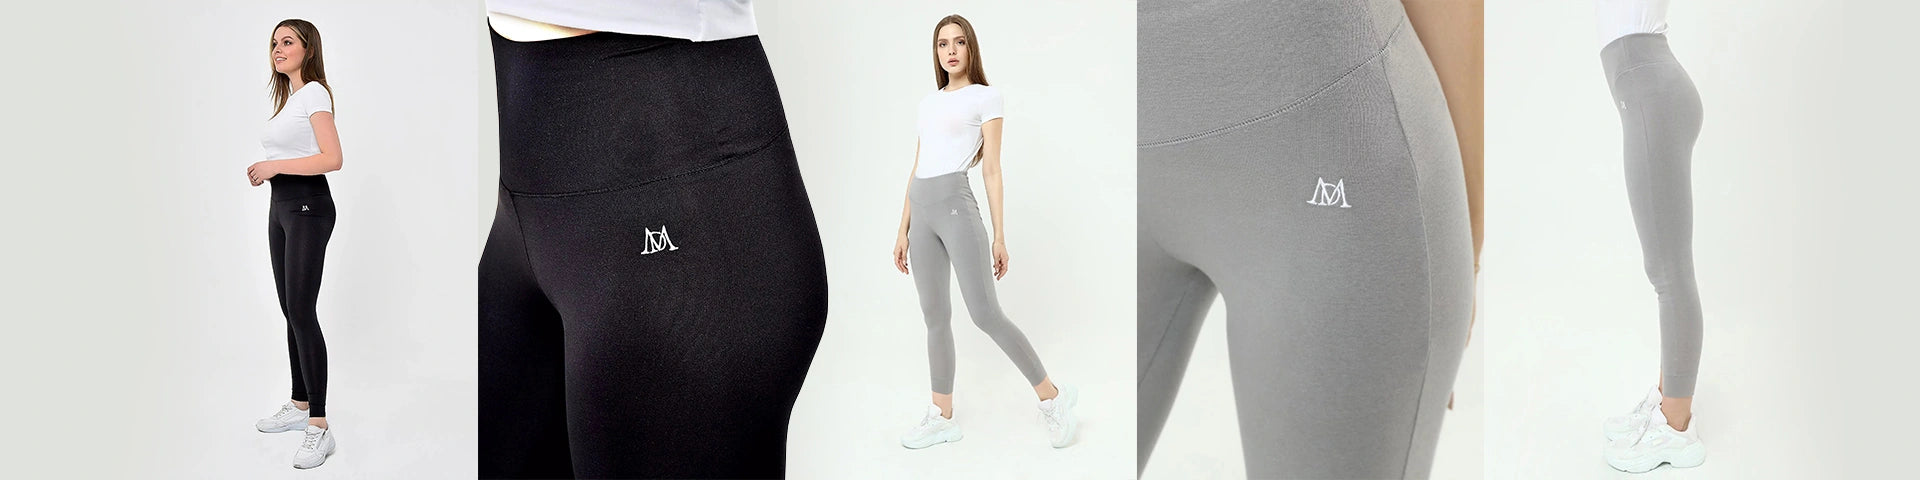 Buy Womens Gym Leggings | 2 Side Pockets | Premium 4 Way Stretch Fabric (S,  Sky Blue) at Amazon.in